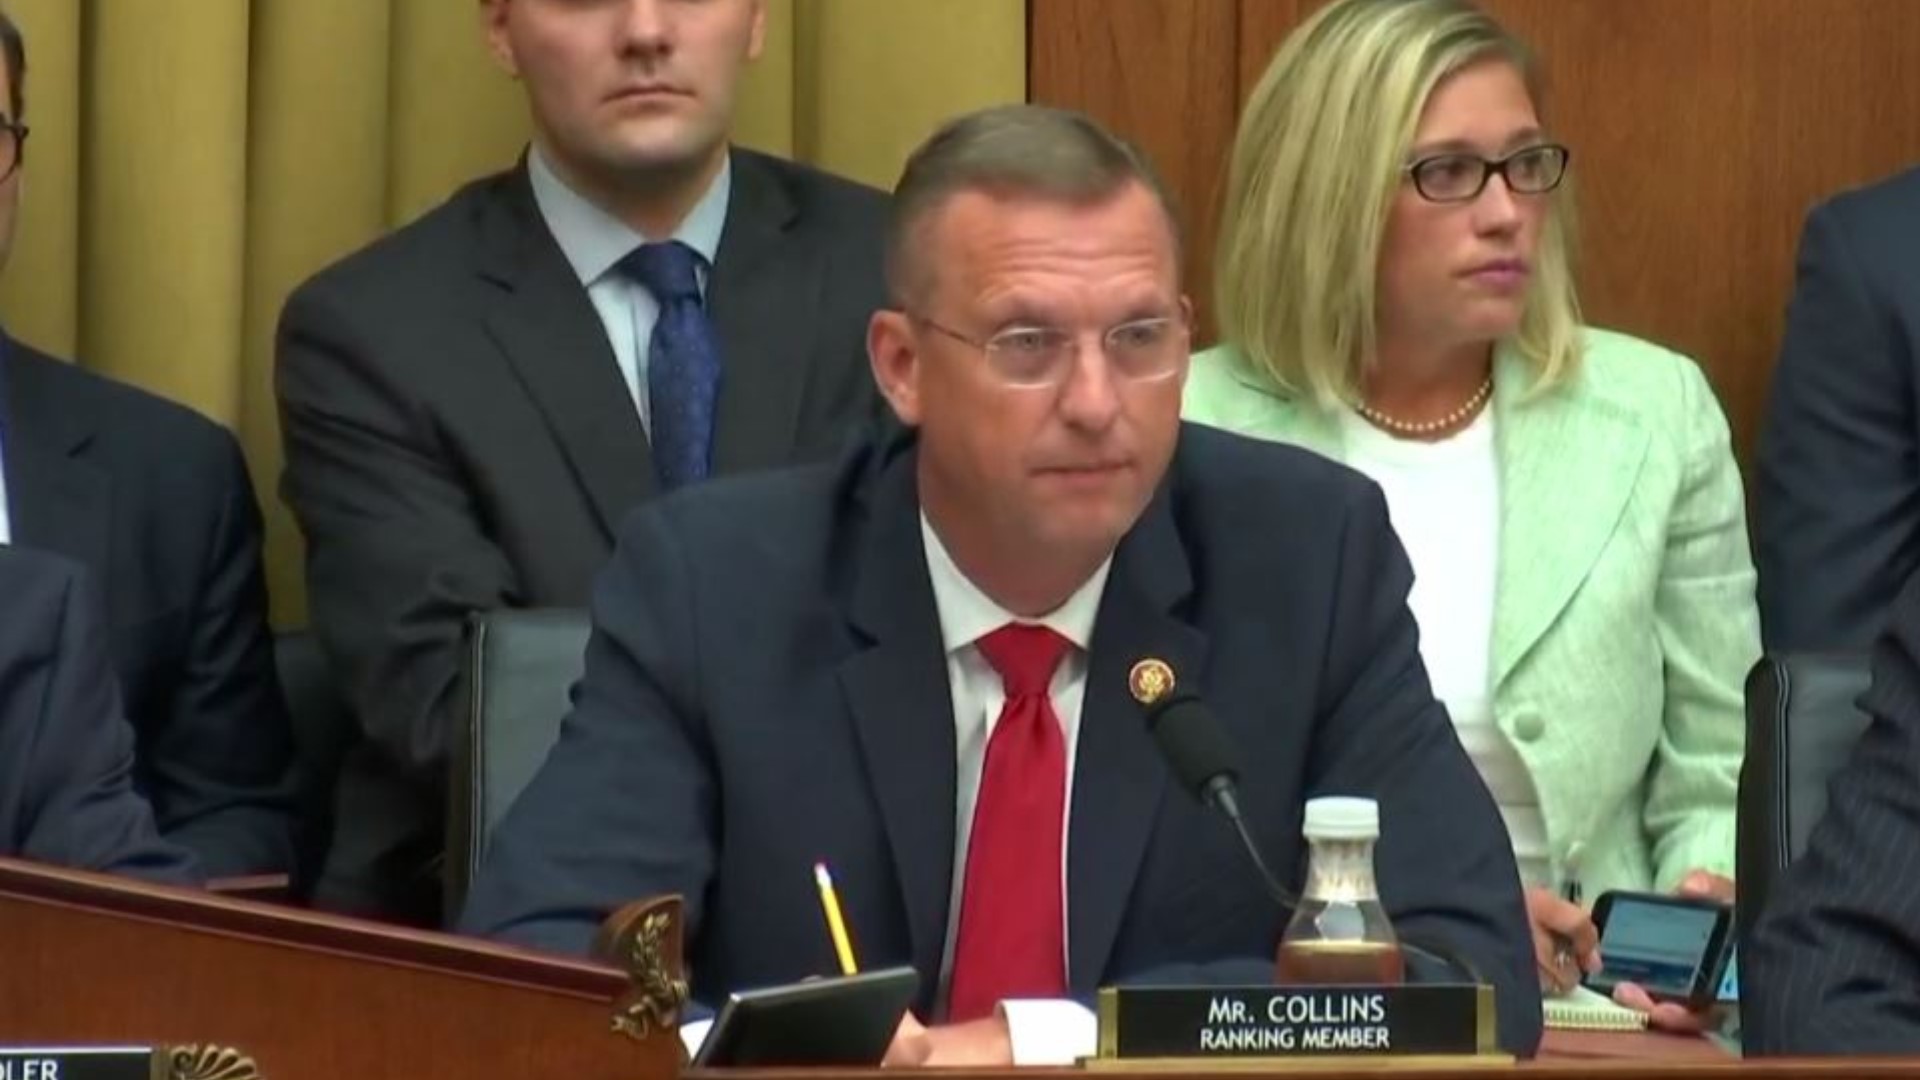 Georgia Rep. Doug Collins, a Republican, is the ranking member of the House Judiciary Committee, and gave opening remarks on behalf of the minority on Wednesday before special counsel Robert Mueller testified before members of Congress.